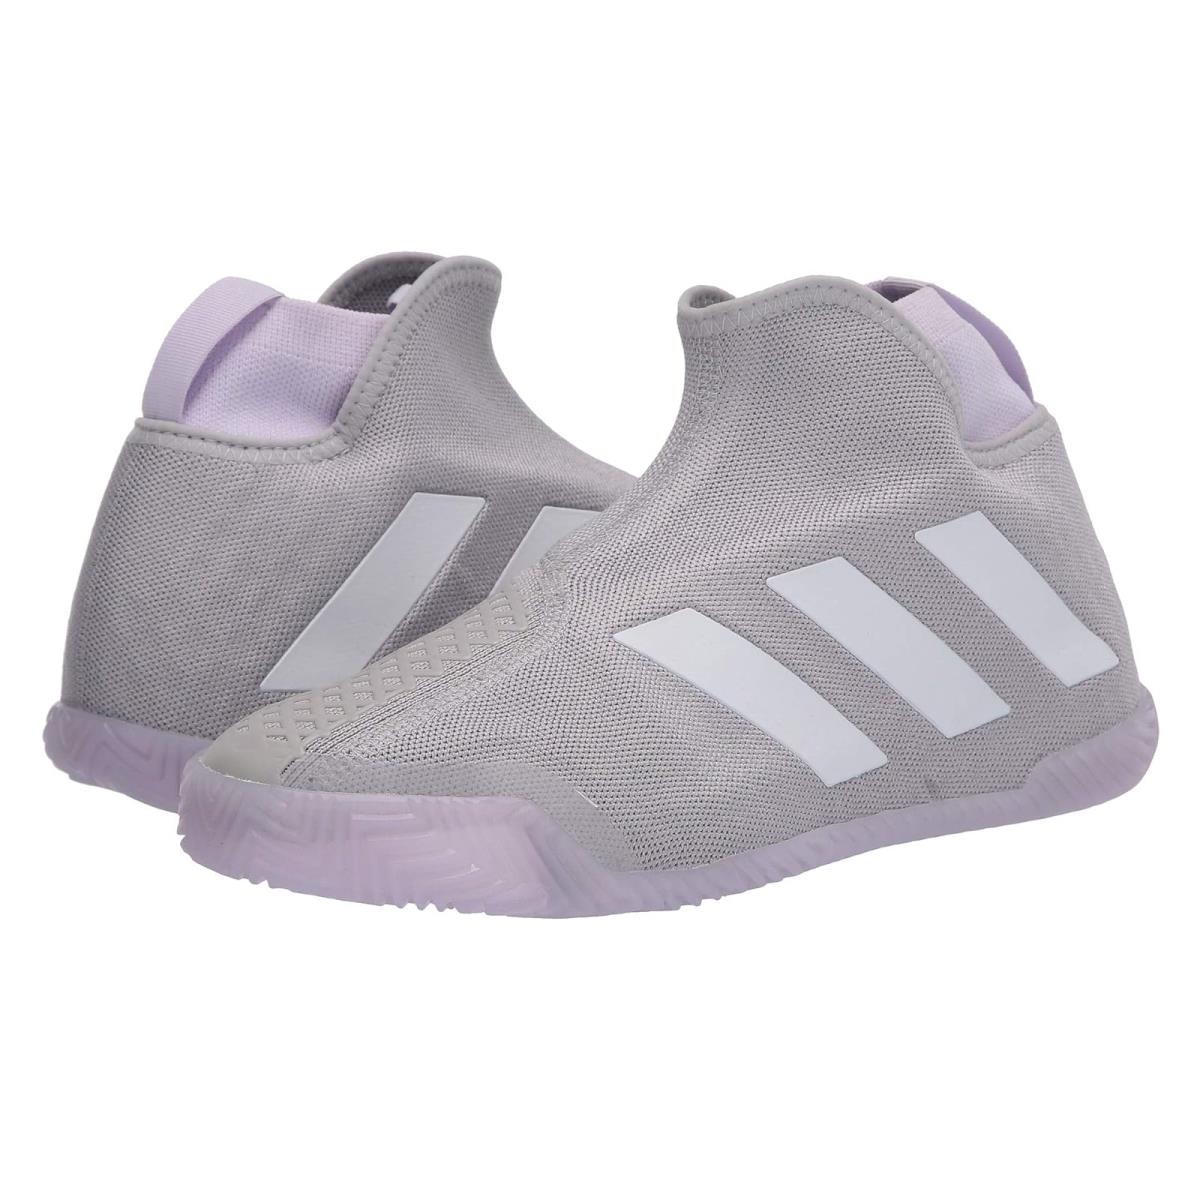 Woman`s Sneakers Athletic Shoes Adidas Stycon Grey Two/Footwear White/Purple Tint